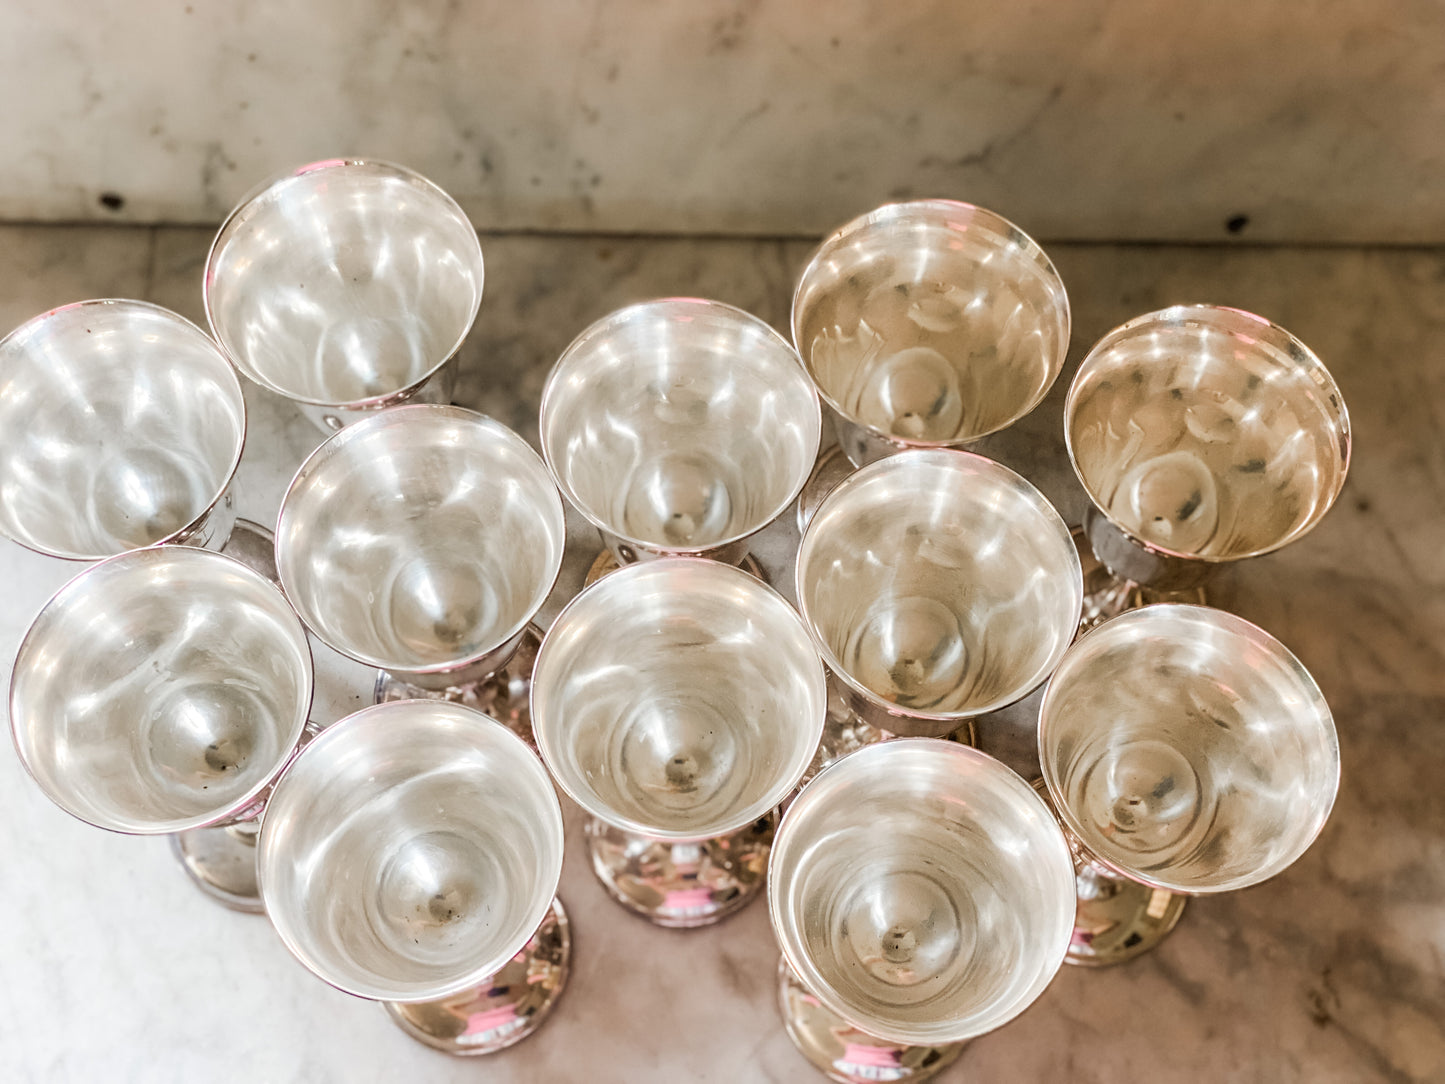 12 Exceptional Silver Wine Goblets